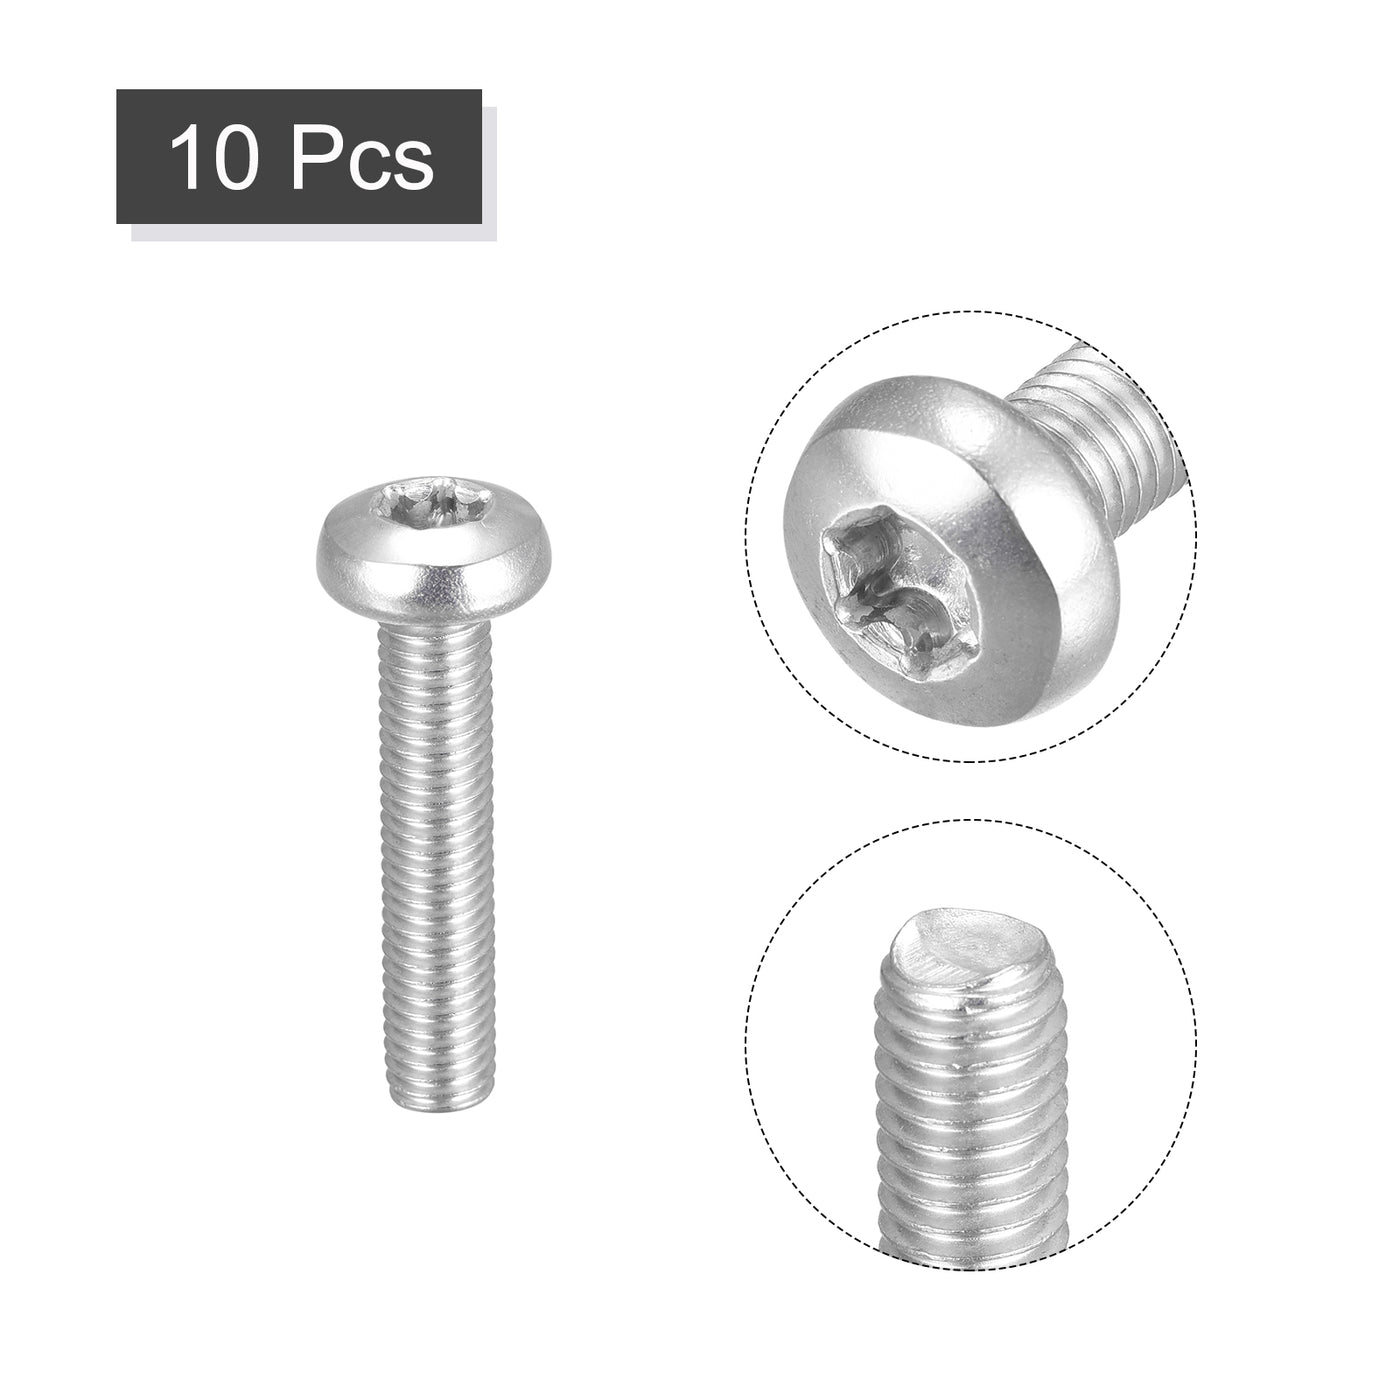 uxcell Uxcell M8x40mm Torx Security Machine Screws, 10pcs 316 Stainless Steel Pan Head Screw